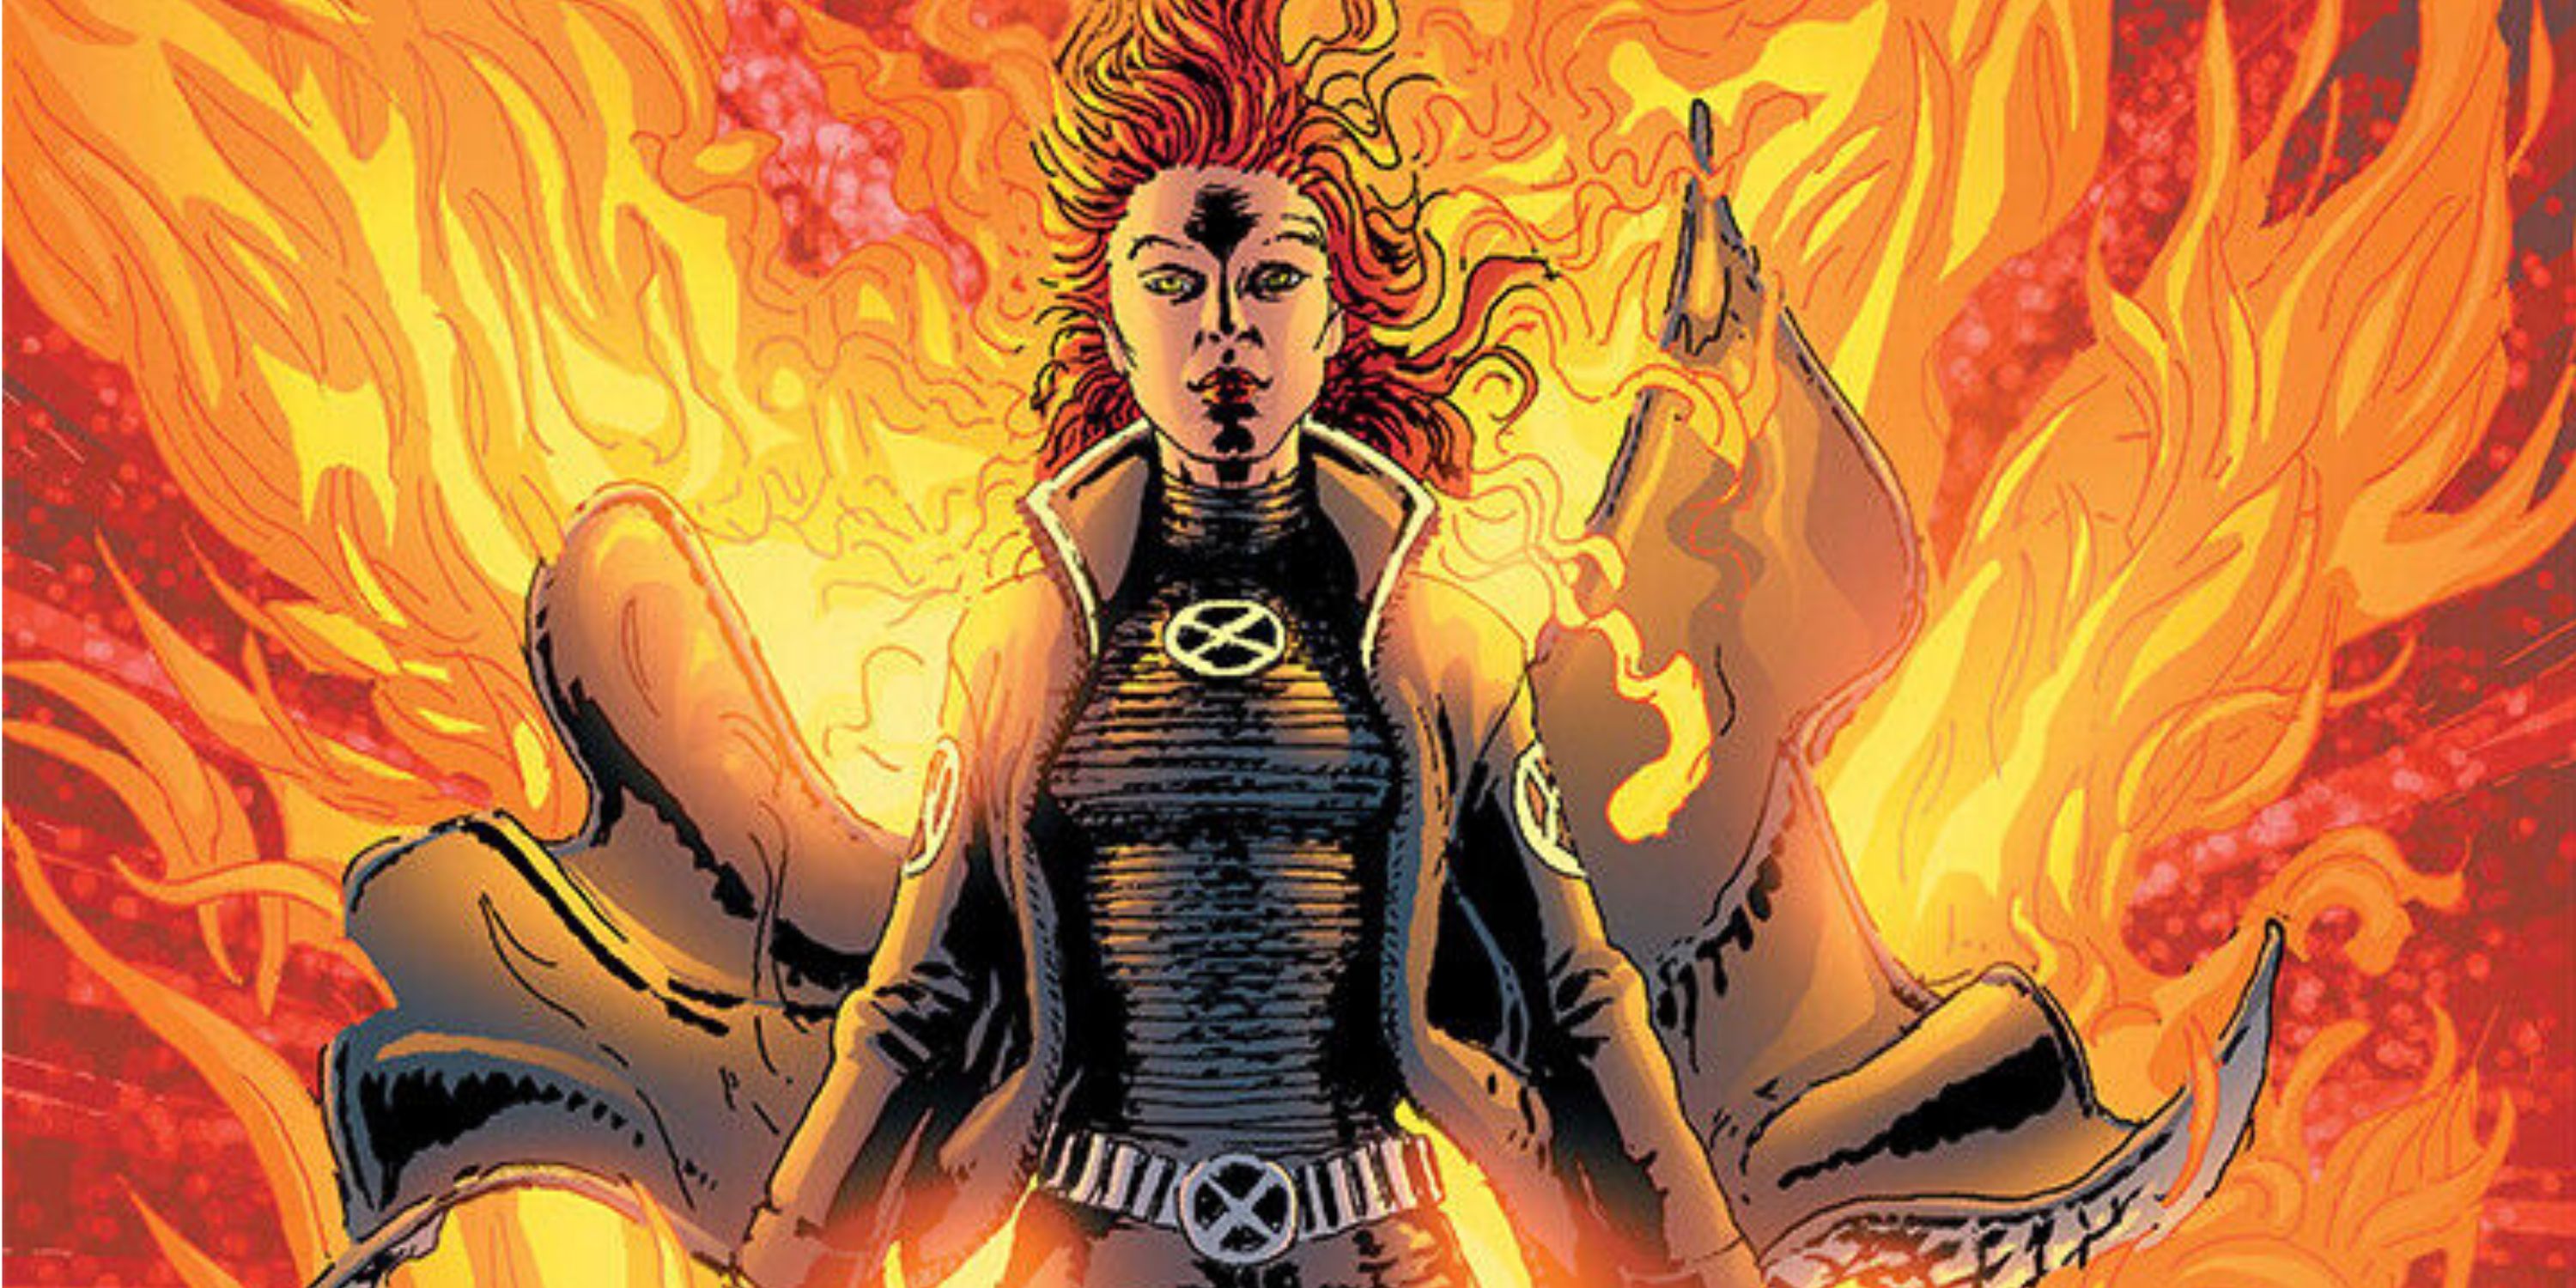 Jean Grey with the Phoenix Force from Marvel Comics' New X-Men